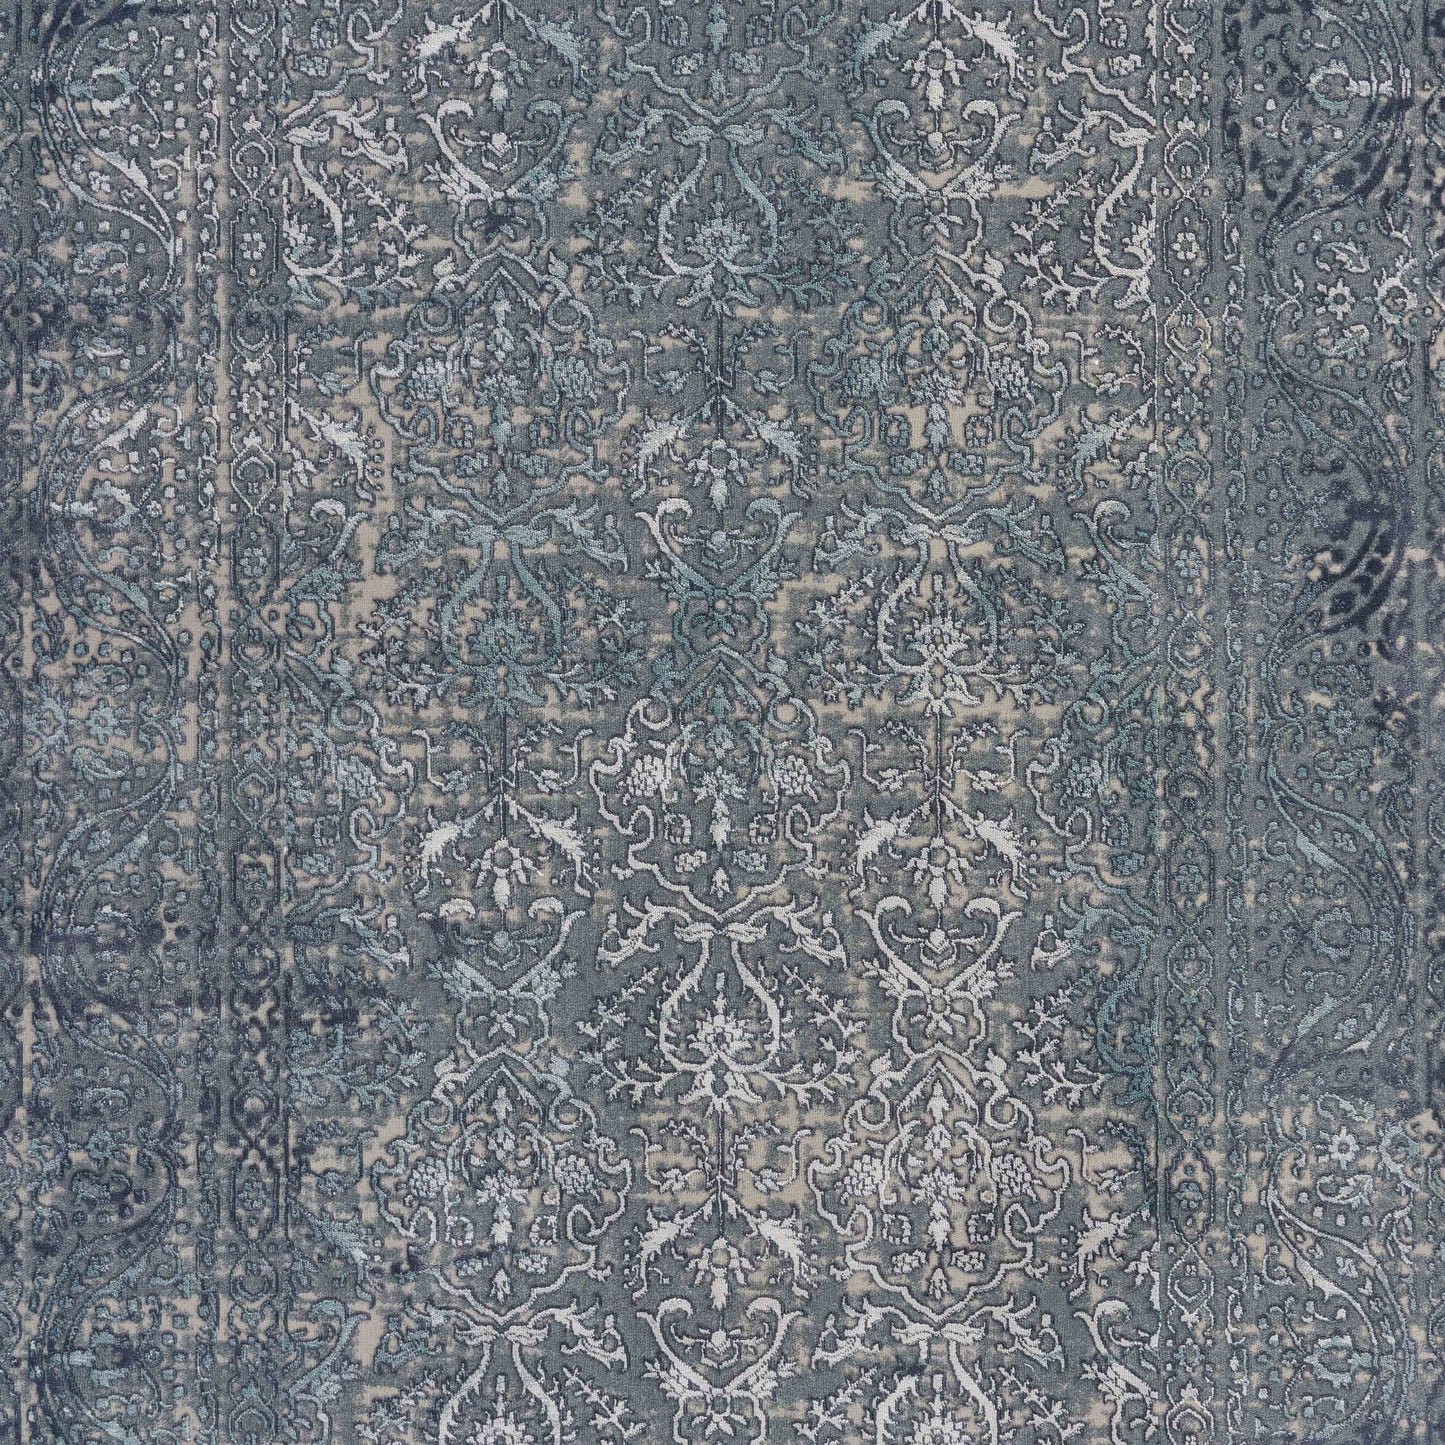 8' X 11' Blue Silver Gray And Cream Damask Distressed Stain Resistant Area Rug